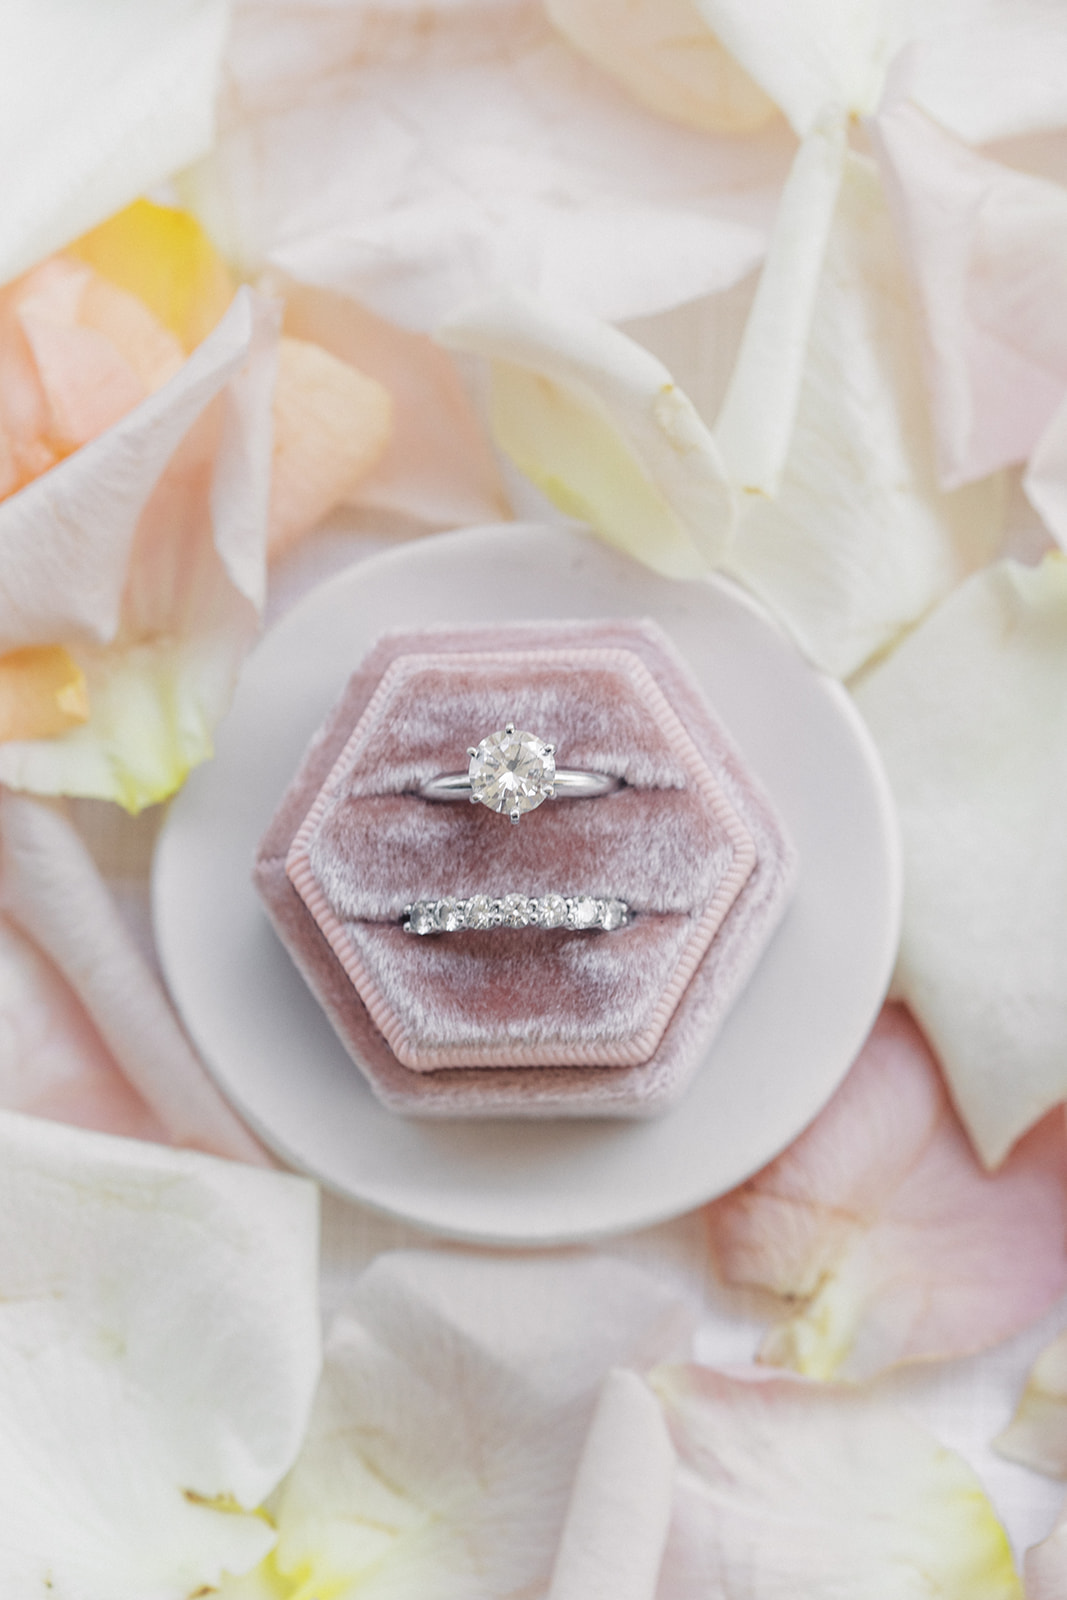 Details of a bride's wedding rings in a ring box surrounded by flower petals